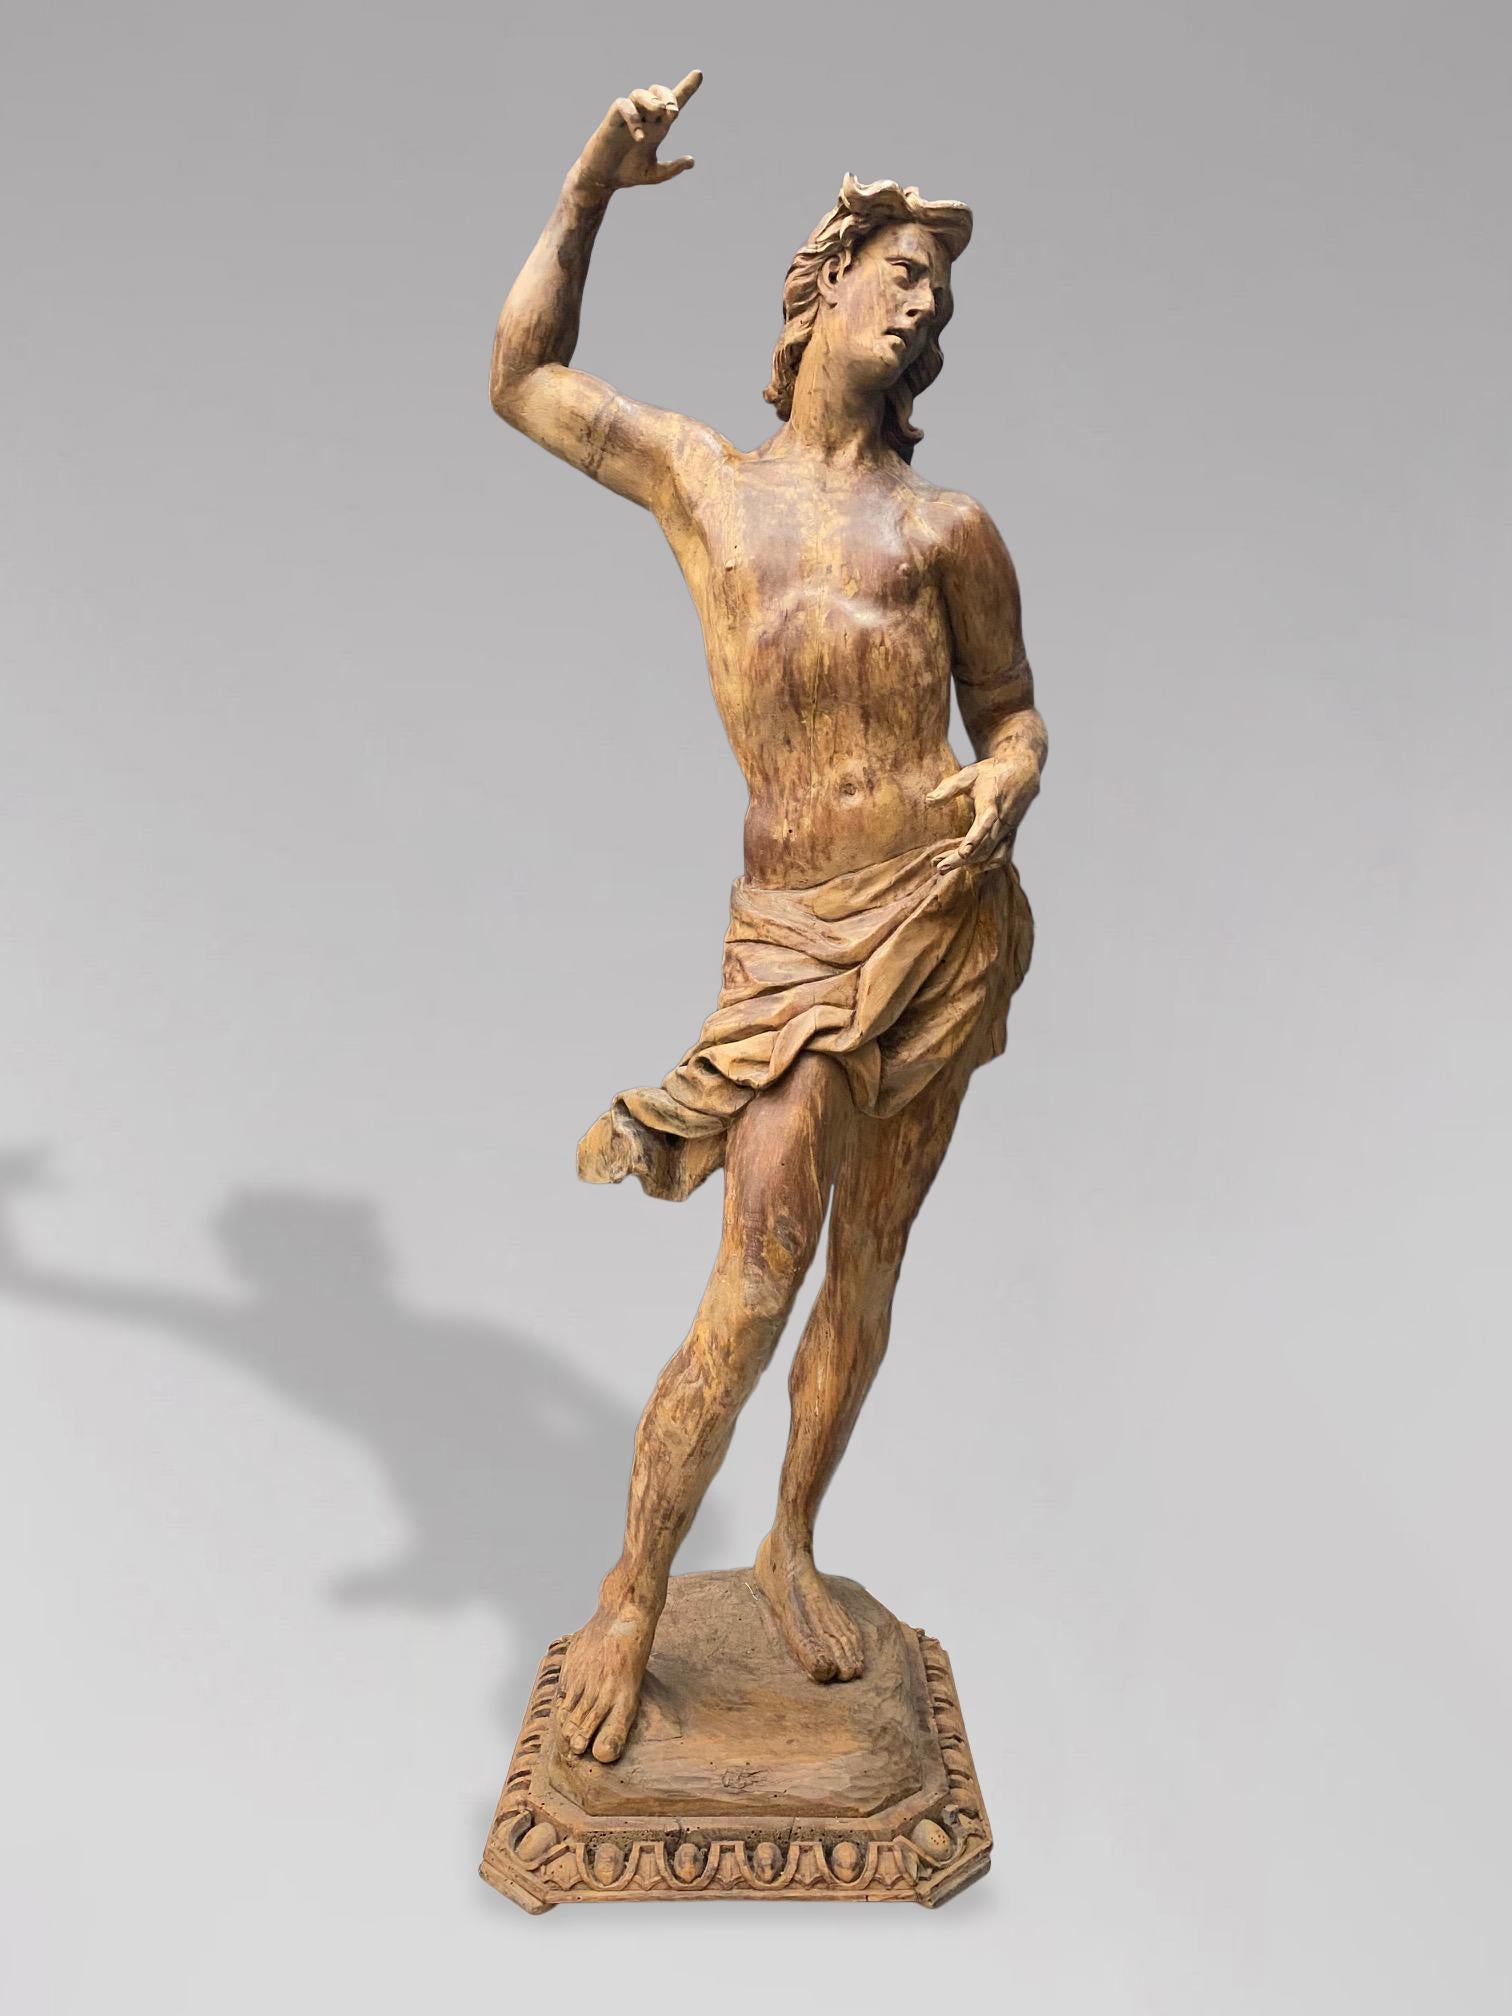 A stunning tall 18th century male life like antique sculpture of St. John the Baptist, carved from wood and once a decoration from a French church or cathedral. This statue will add depth and meaning to any contemporary home. This statue will work